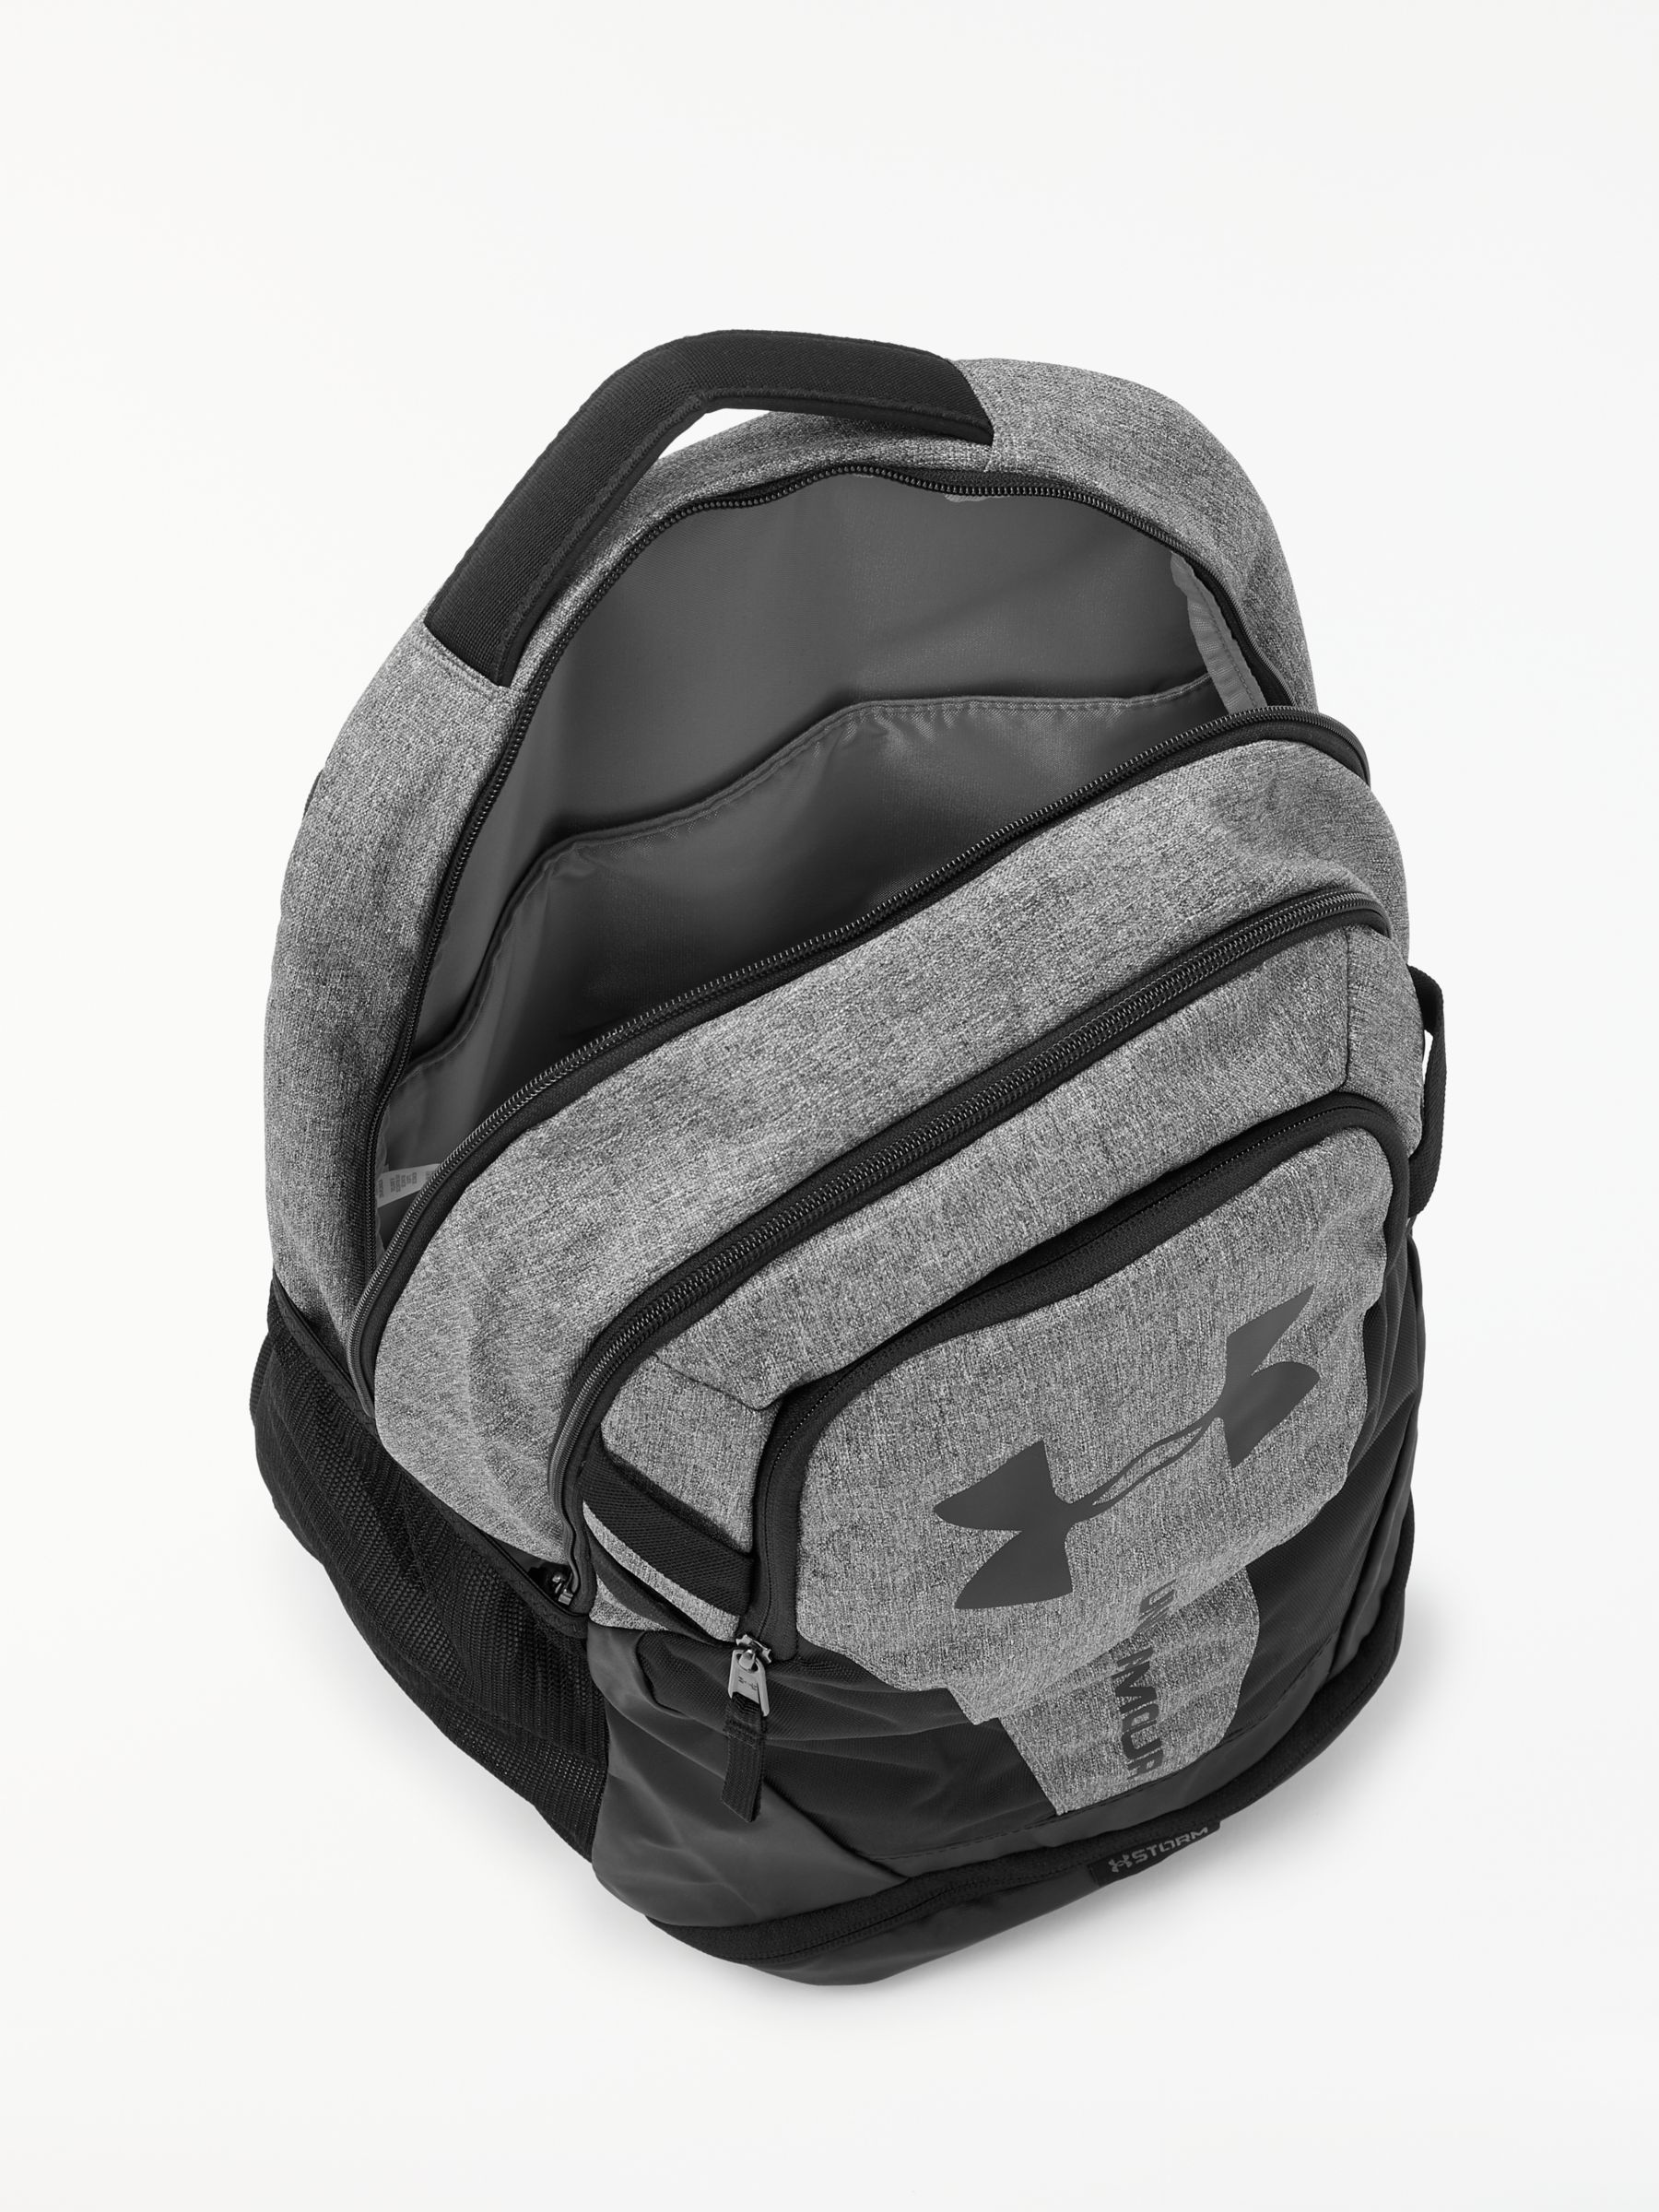 under armour storm 3.0 backpack